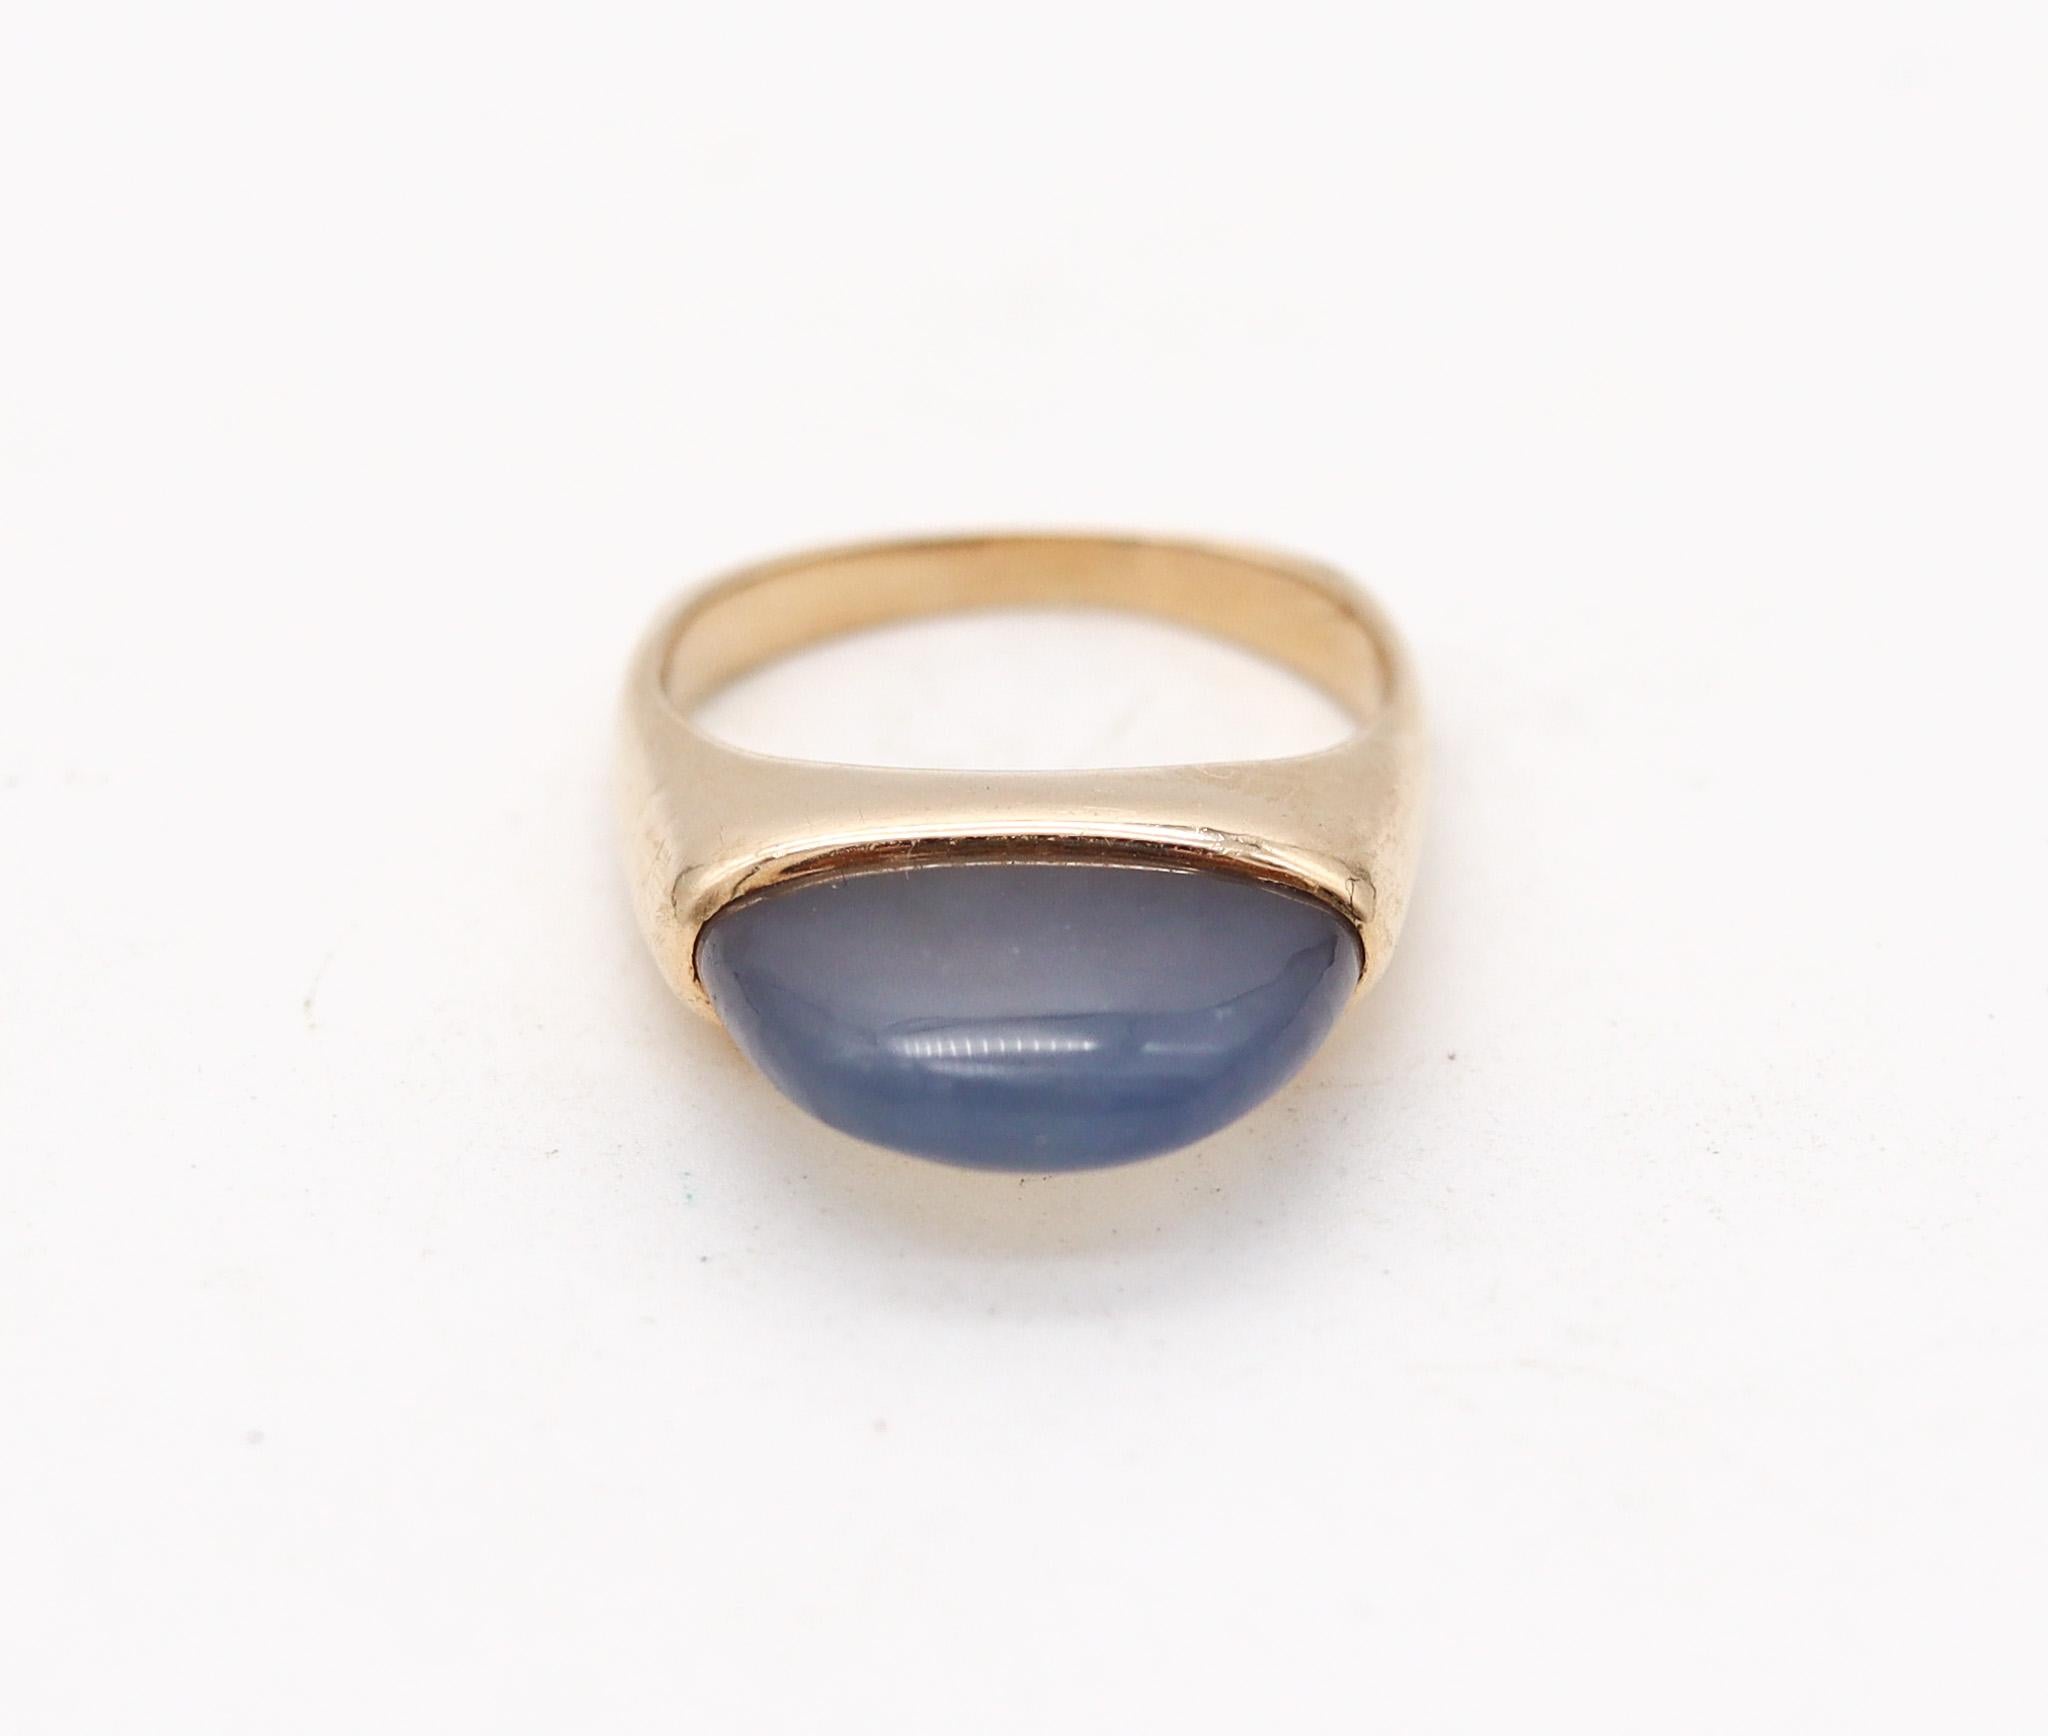 Scandinavian sculptural ring.

Gorgeous sculptural modernist ring, created in Denmark during the late mid century period back in the 1960. This piece has been crafted with a simple, sleek, flatty and cushioned shape, in solid yellow gold of 14